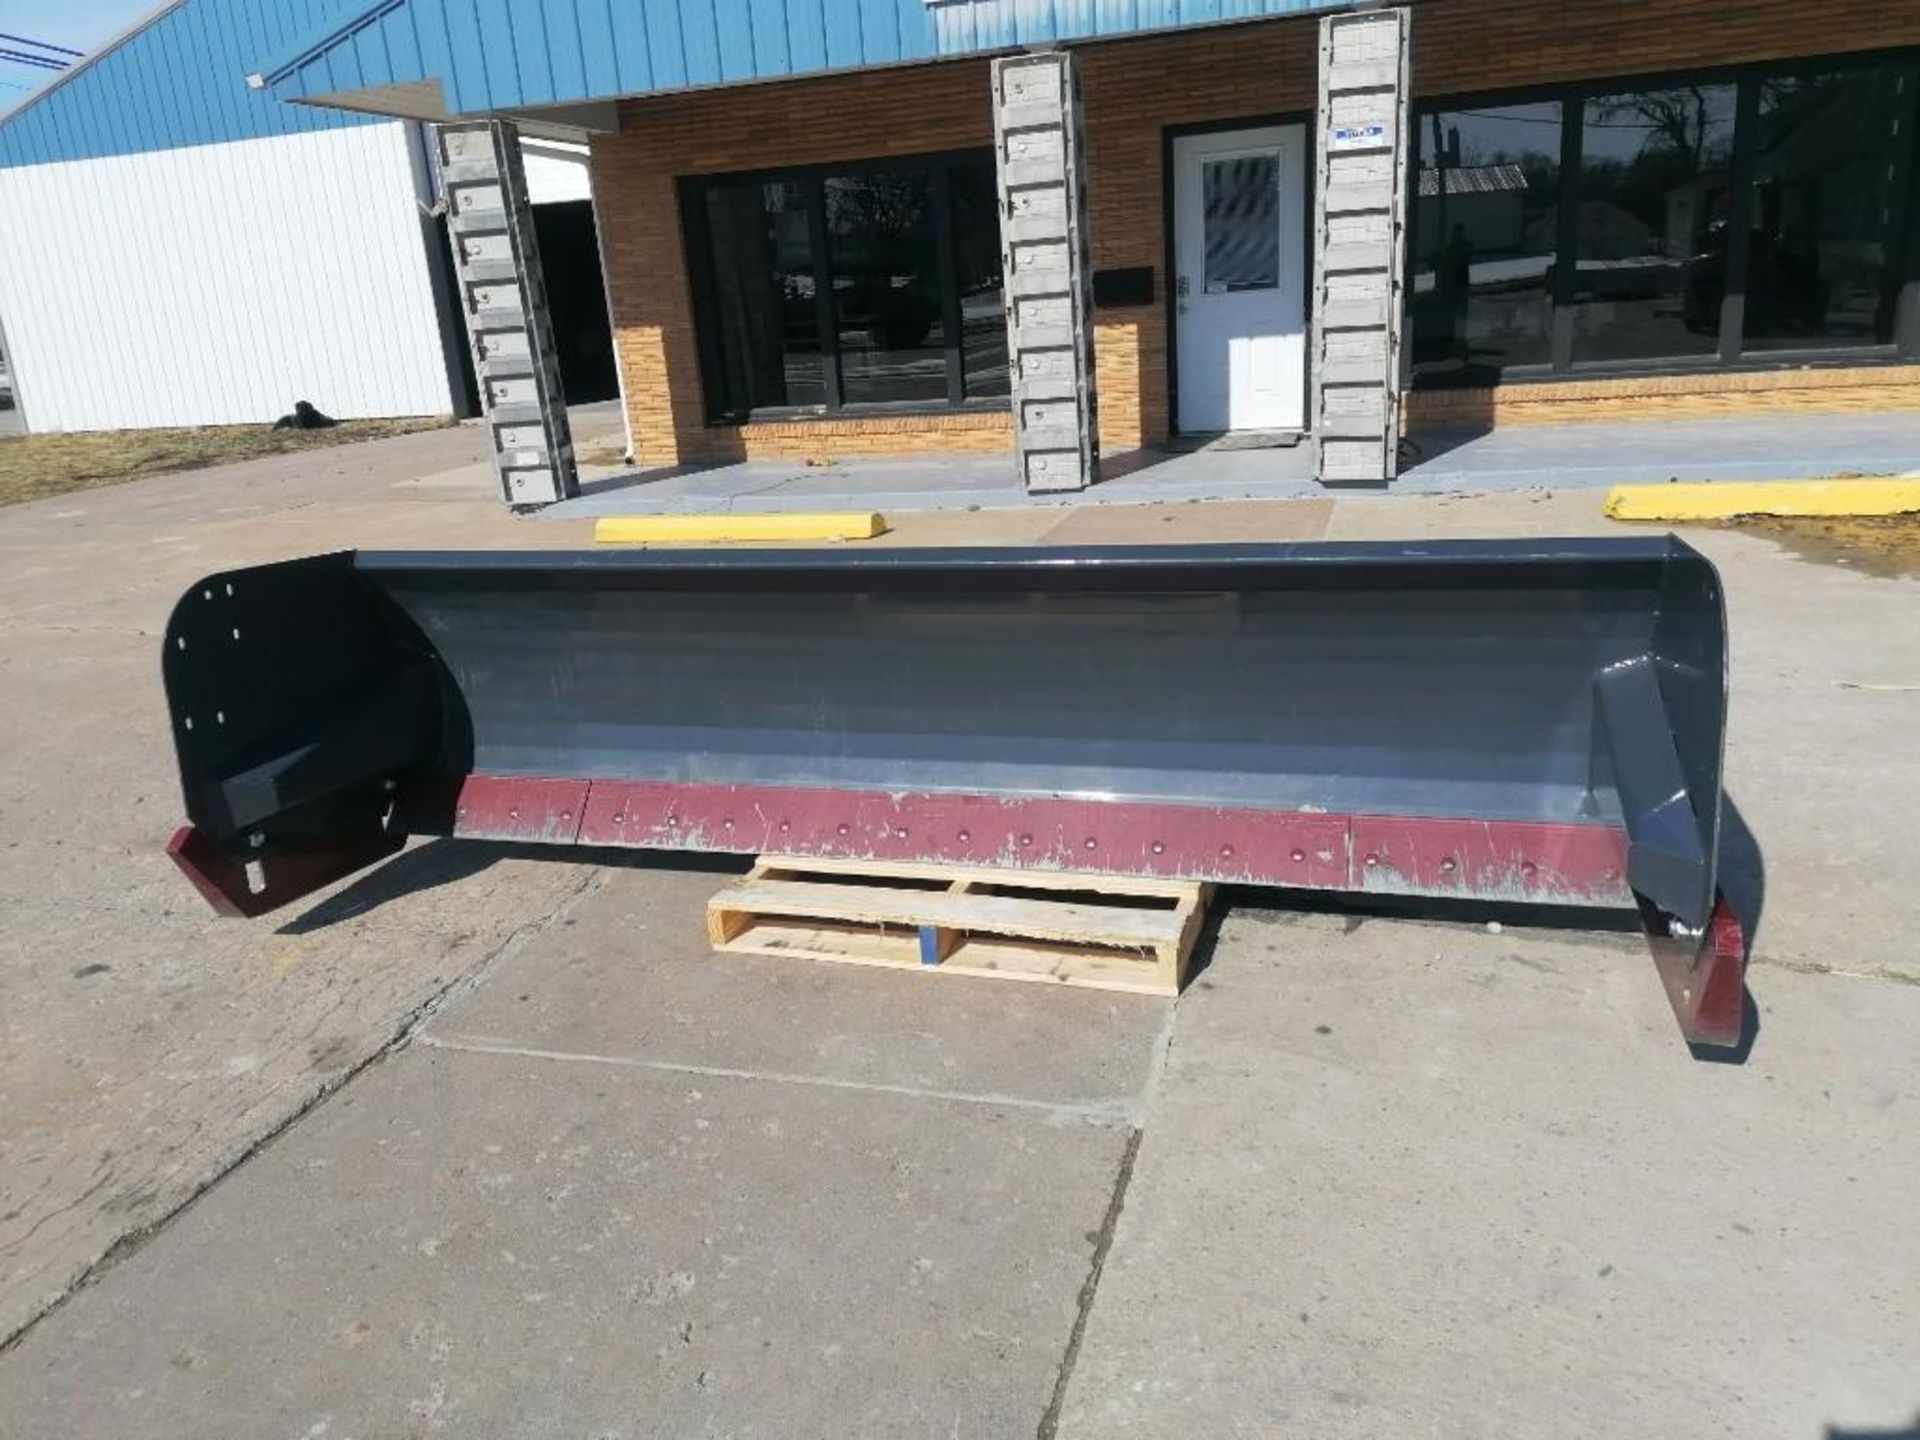 (1) VIRNIG 120" Heavy Duty Steel Edge Snow Pusher Attachment, Serial #165988. Located in Mt. - Image 3 of 15